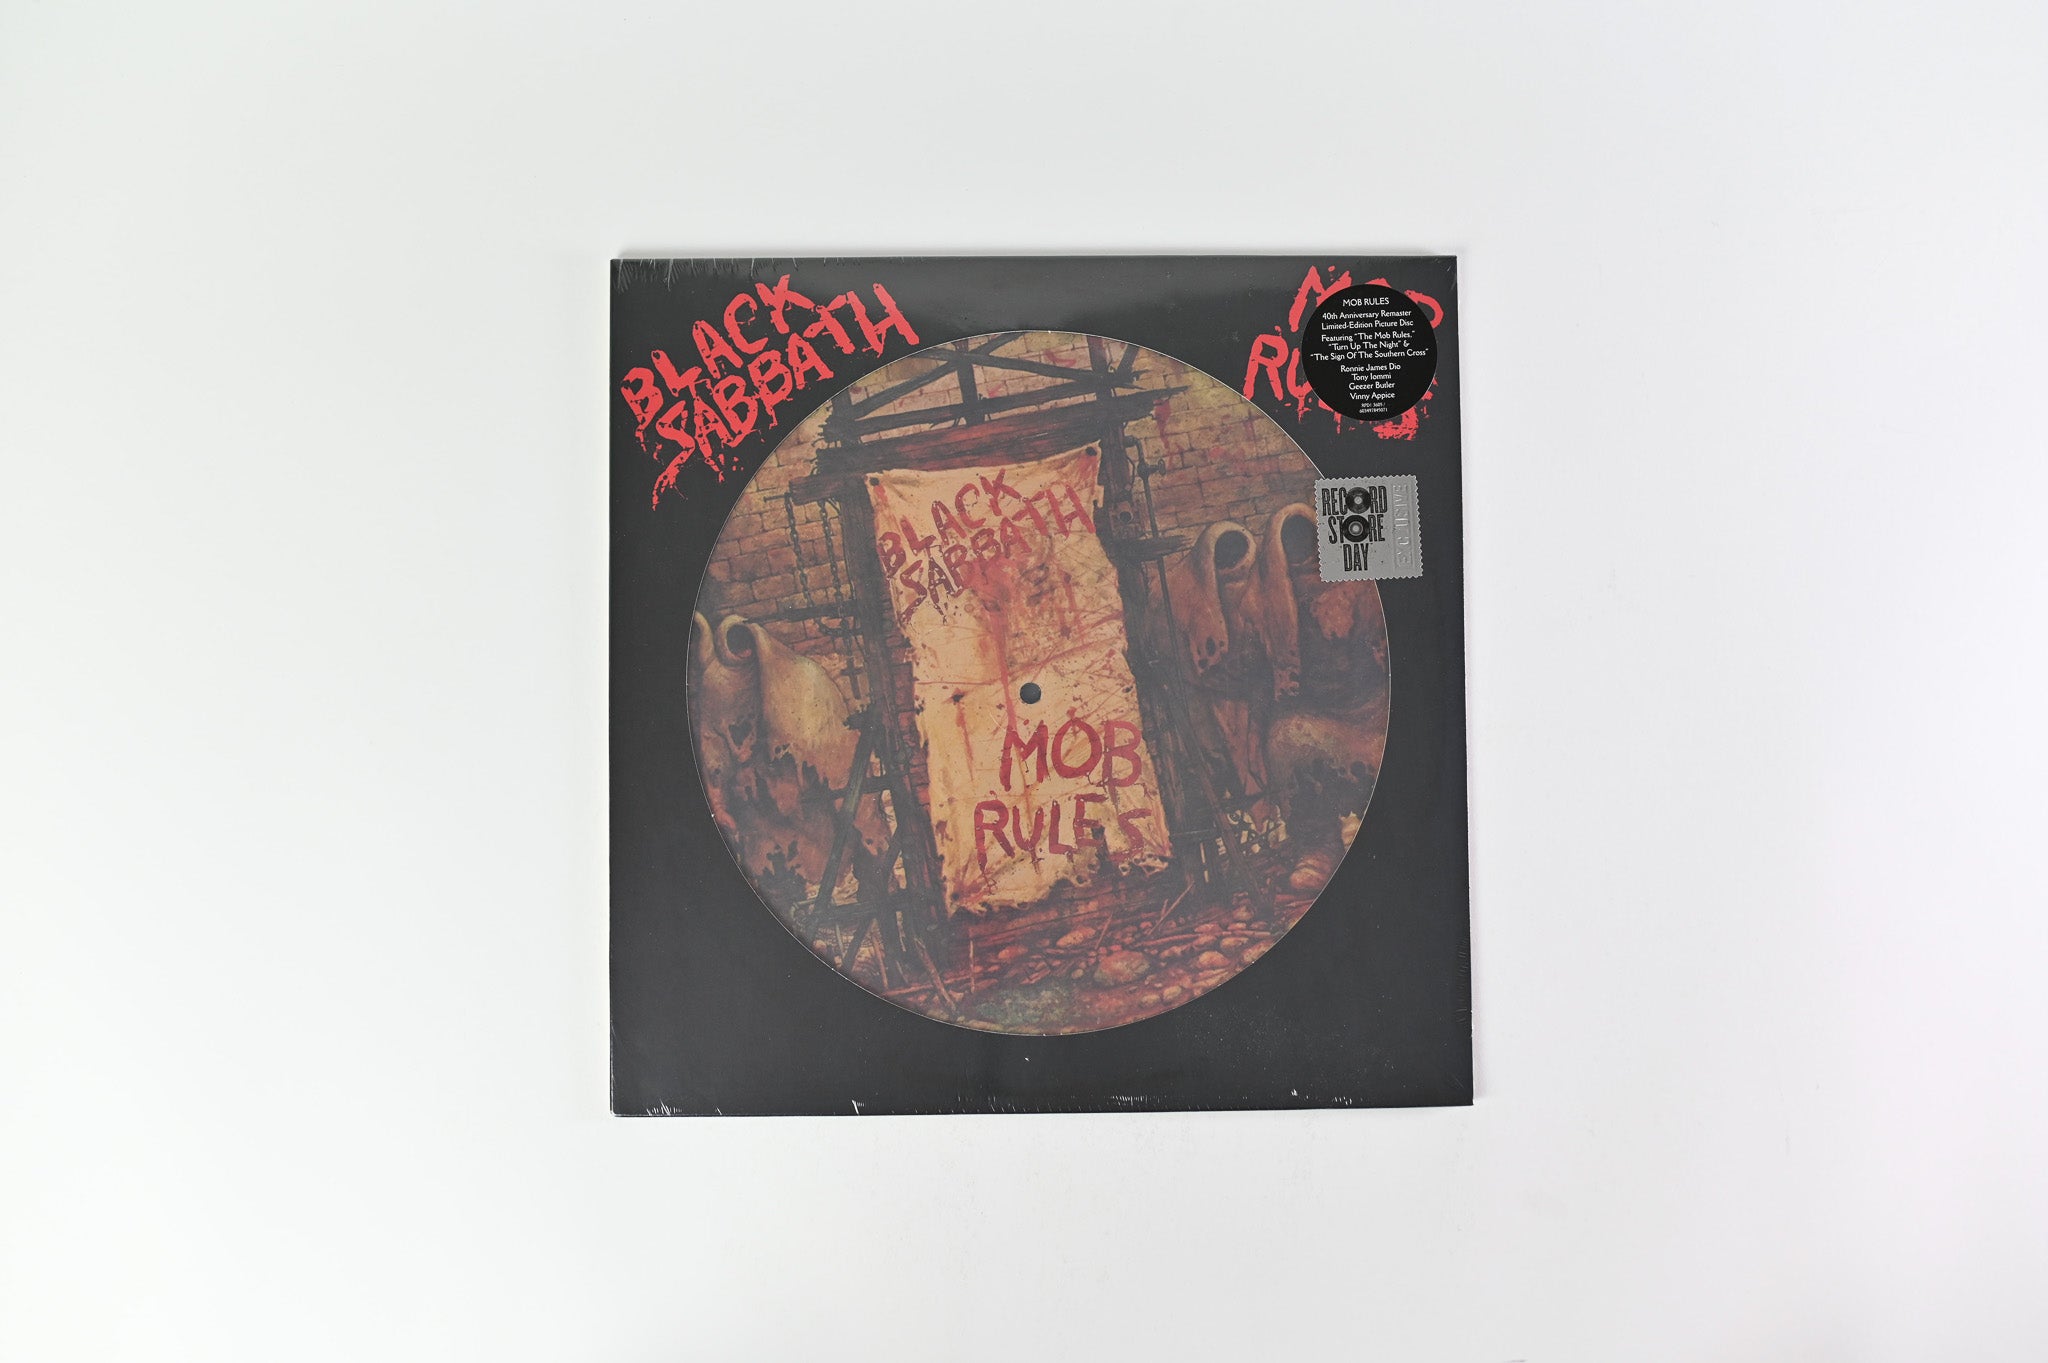 Black Sabbath - Mob Rules SEALED RSD Picture Disc Reissue on Rhino/Warner Records